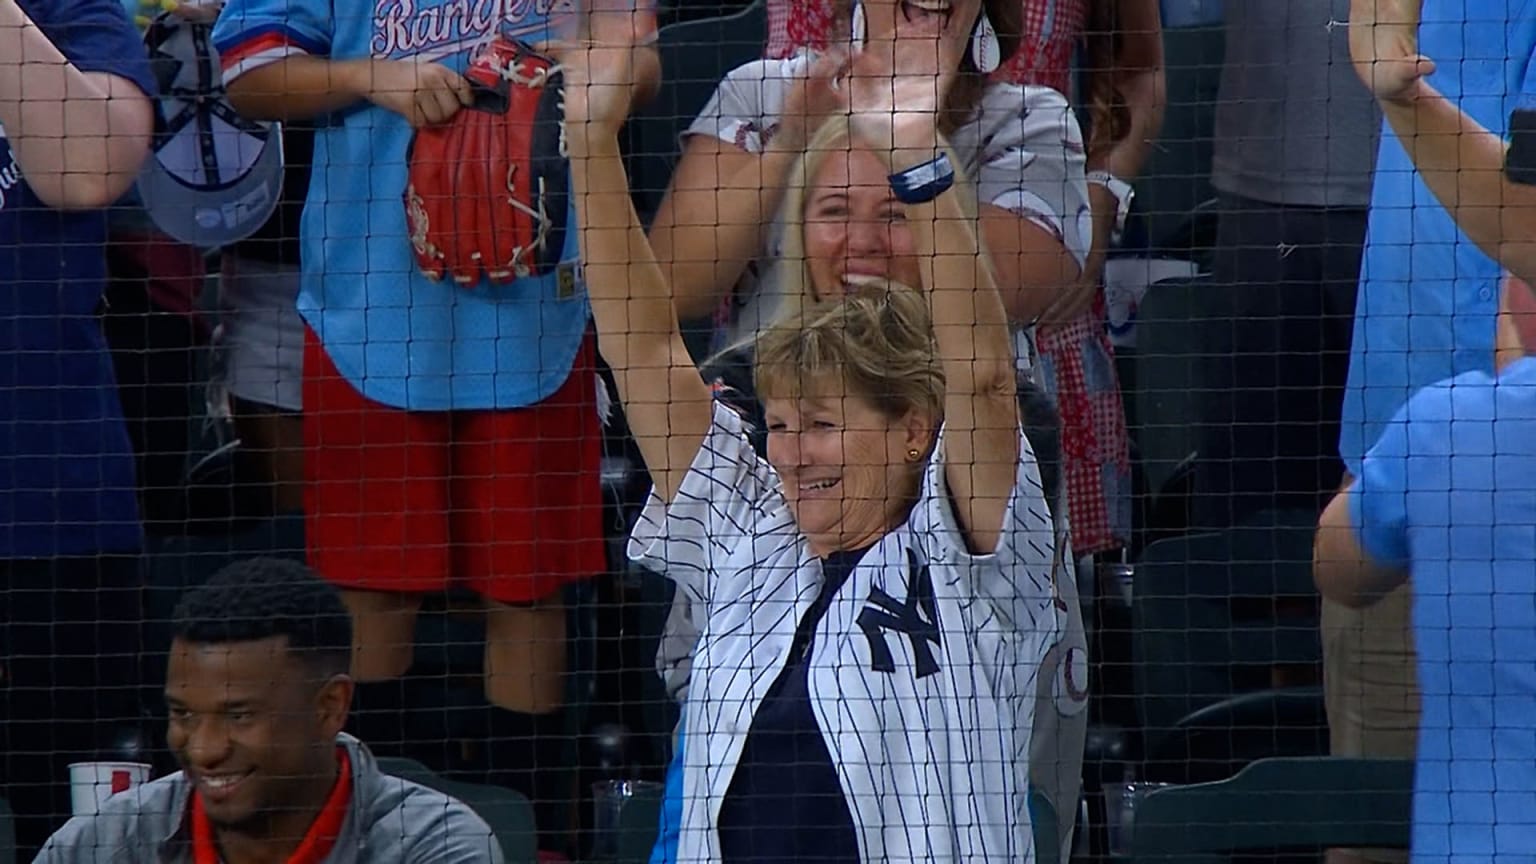 A woman in a Yankees jersey raises her hands in the air and smiles